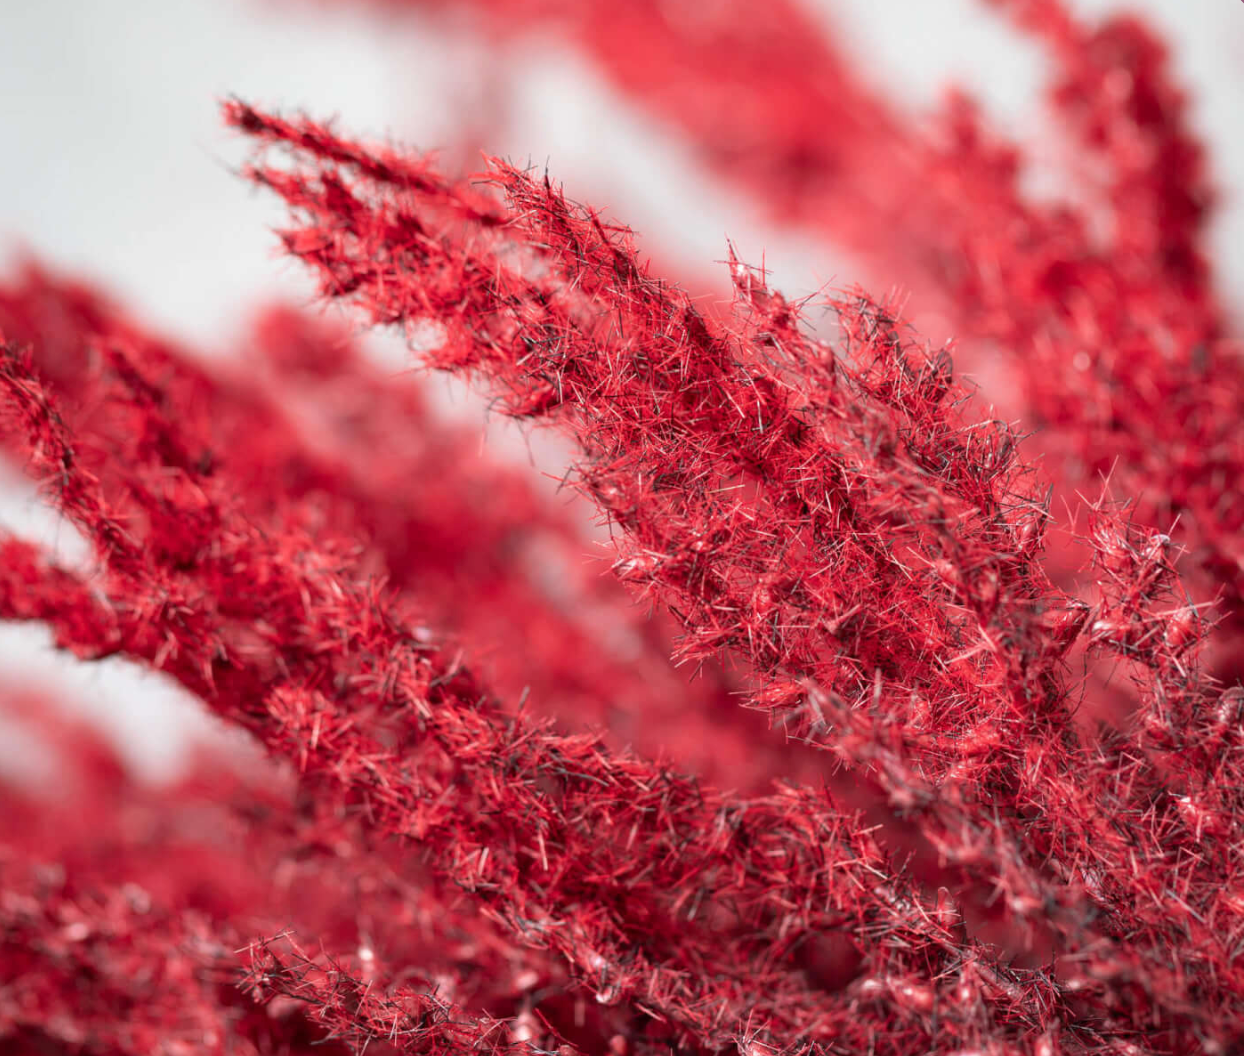 FAUX DRIED RED GRASS GARLAND